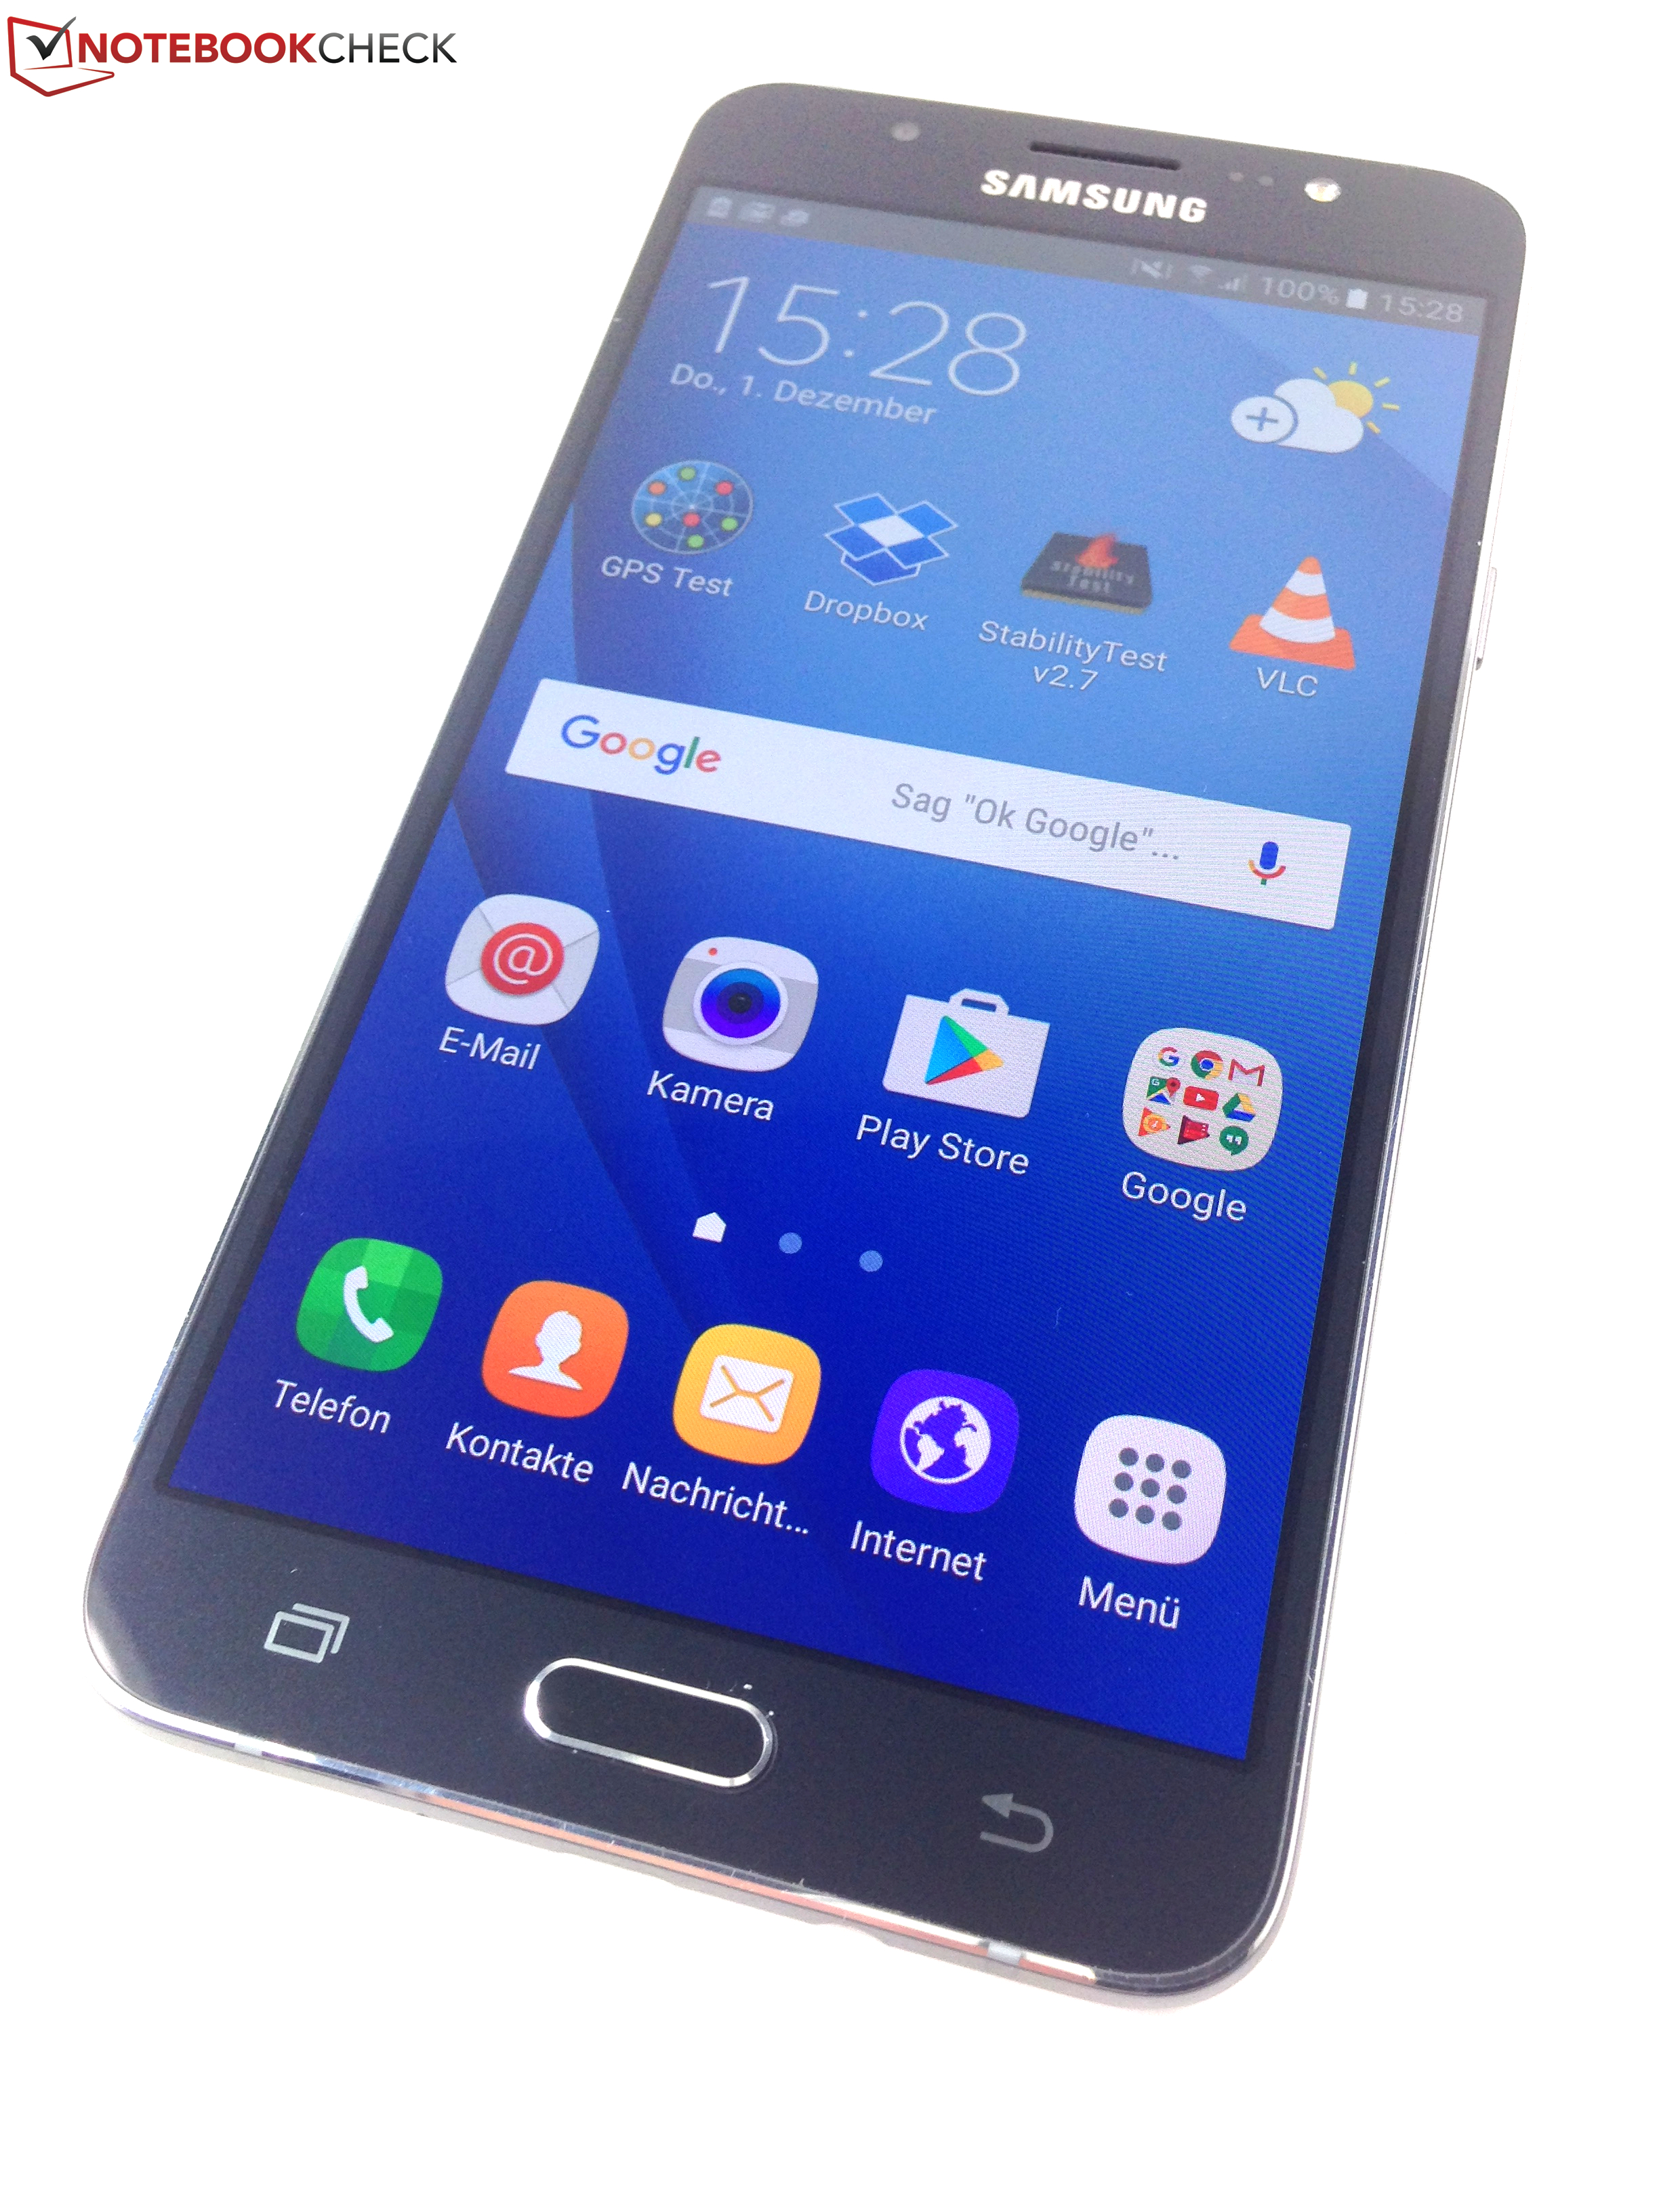 Samsung Galaxy J7 buy smartphone, compare prices in stores. Samsung ...